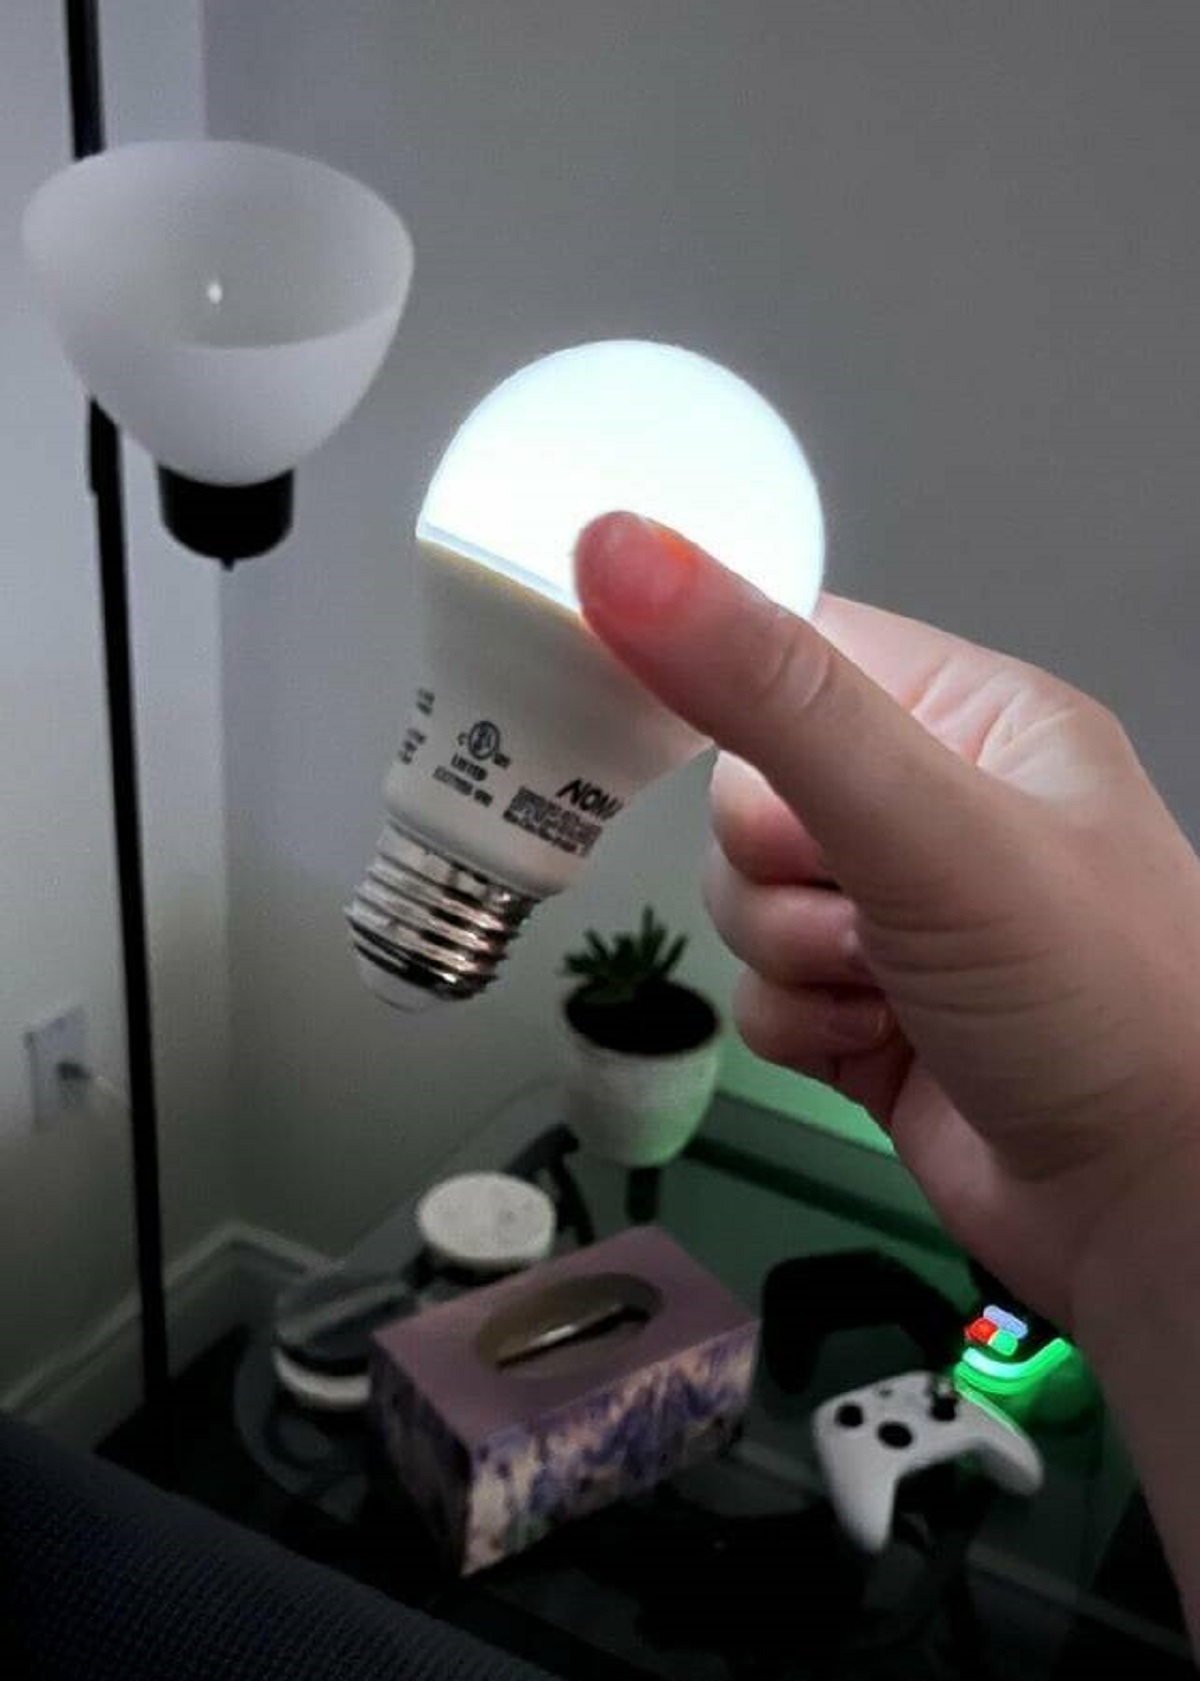 "Light bulb stayed on after taking it out"